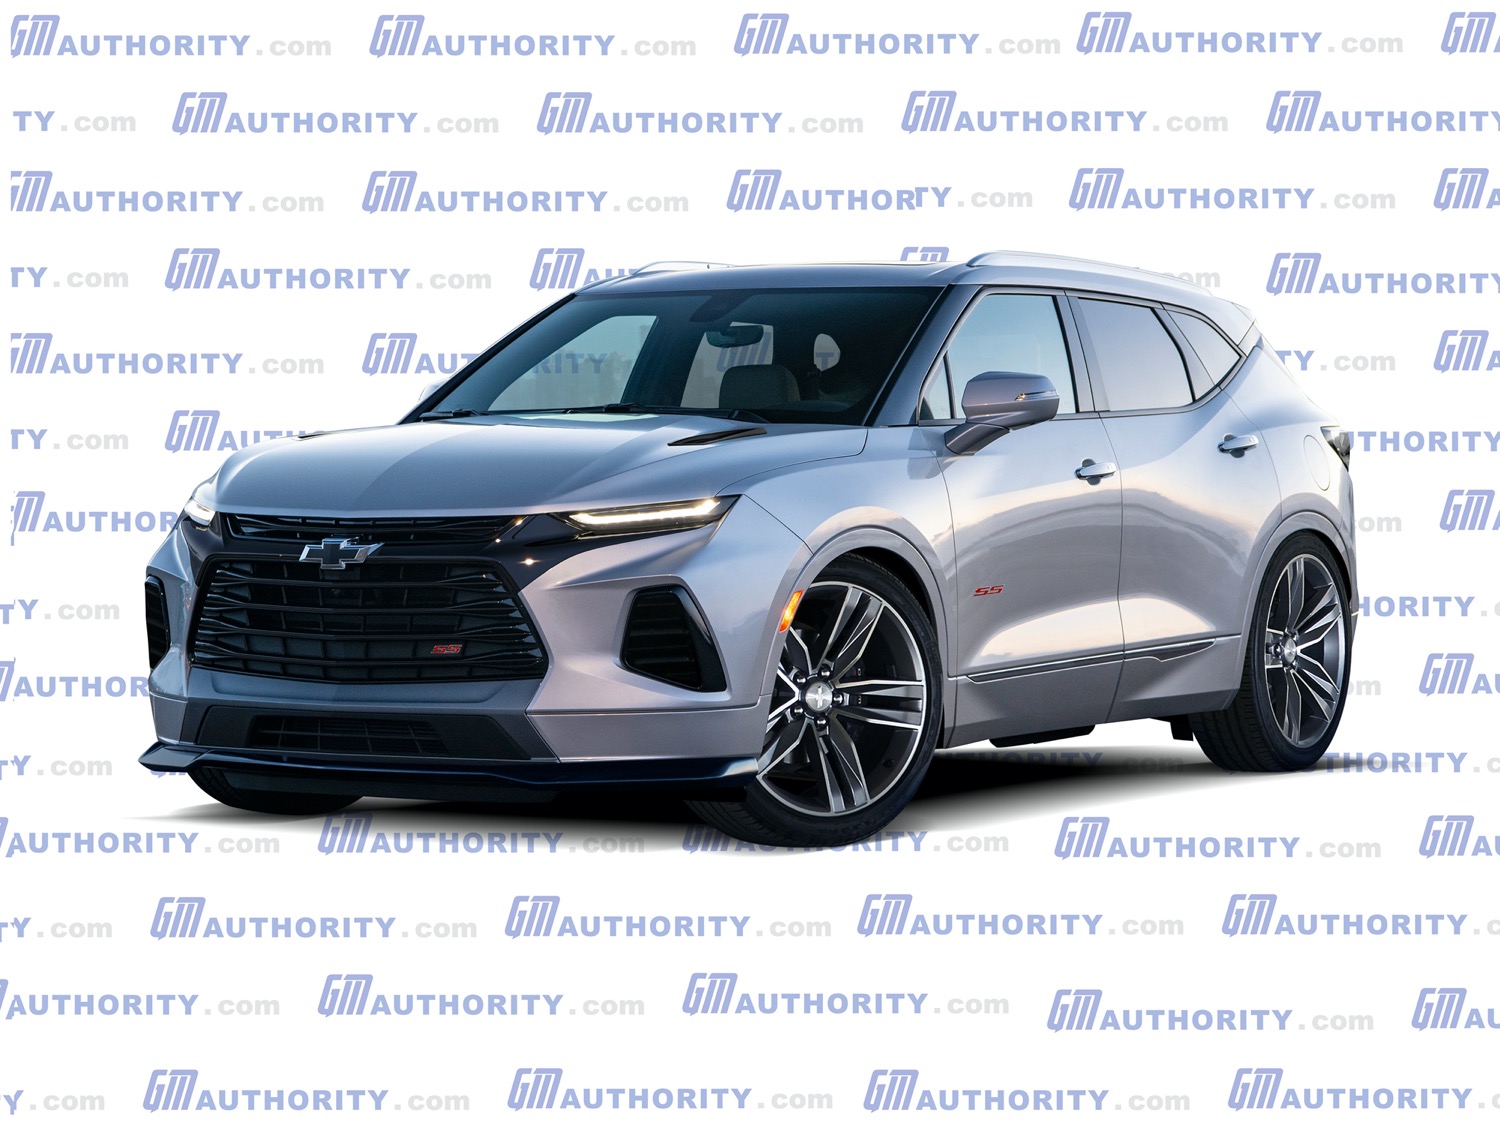 Hypothetical Chevy Blazer SS Rendered  GM Authority